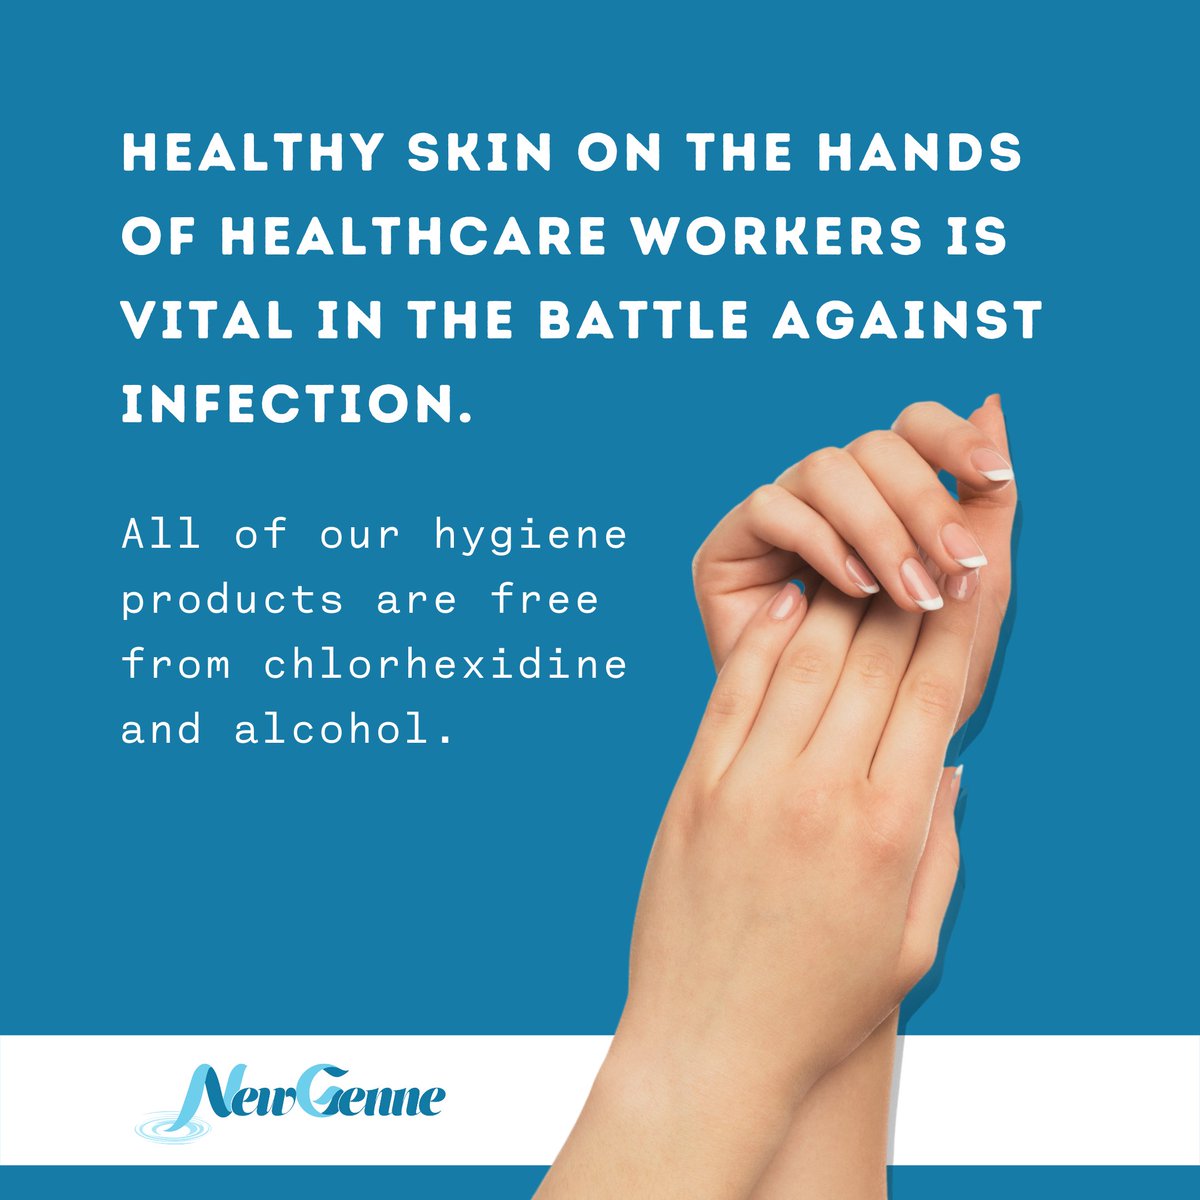 Chlorhexidine and alcohol remove vital fats from the #skin, resulting in #skindryness. These are two of the most common chemicals in antimicrobial #handhygiene products. #NewGenne’s products are just as effective and a lot more gentle, free of both chlorhexidine and alcohol.